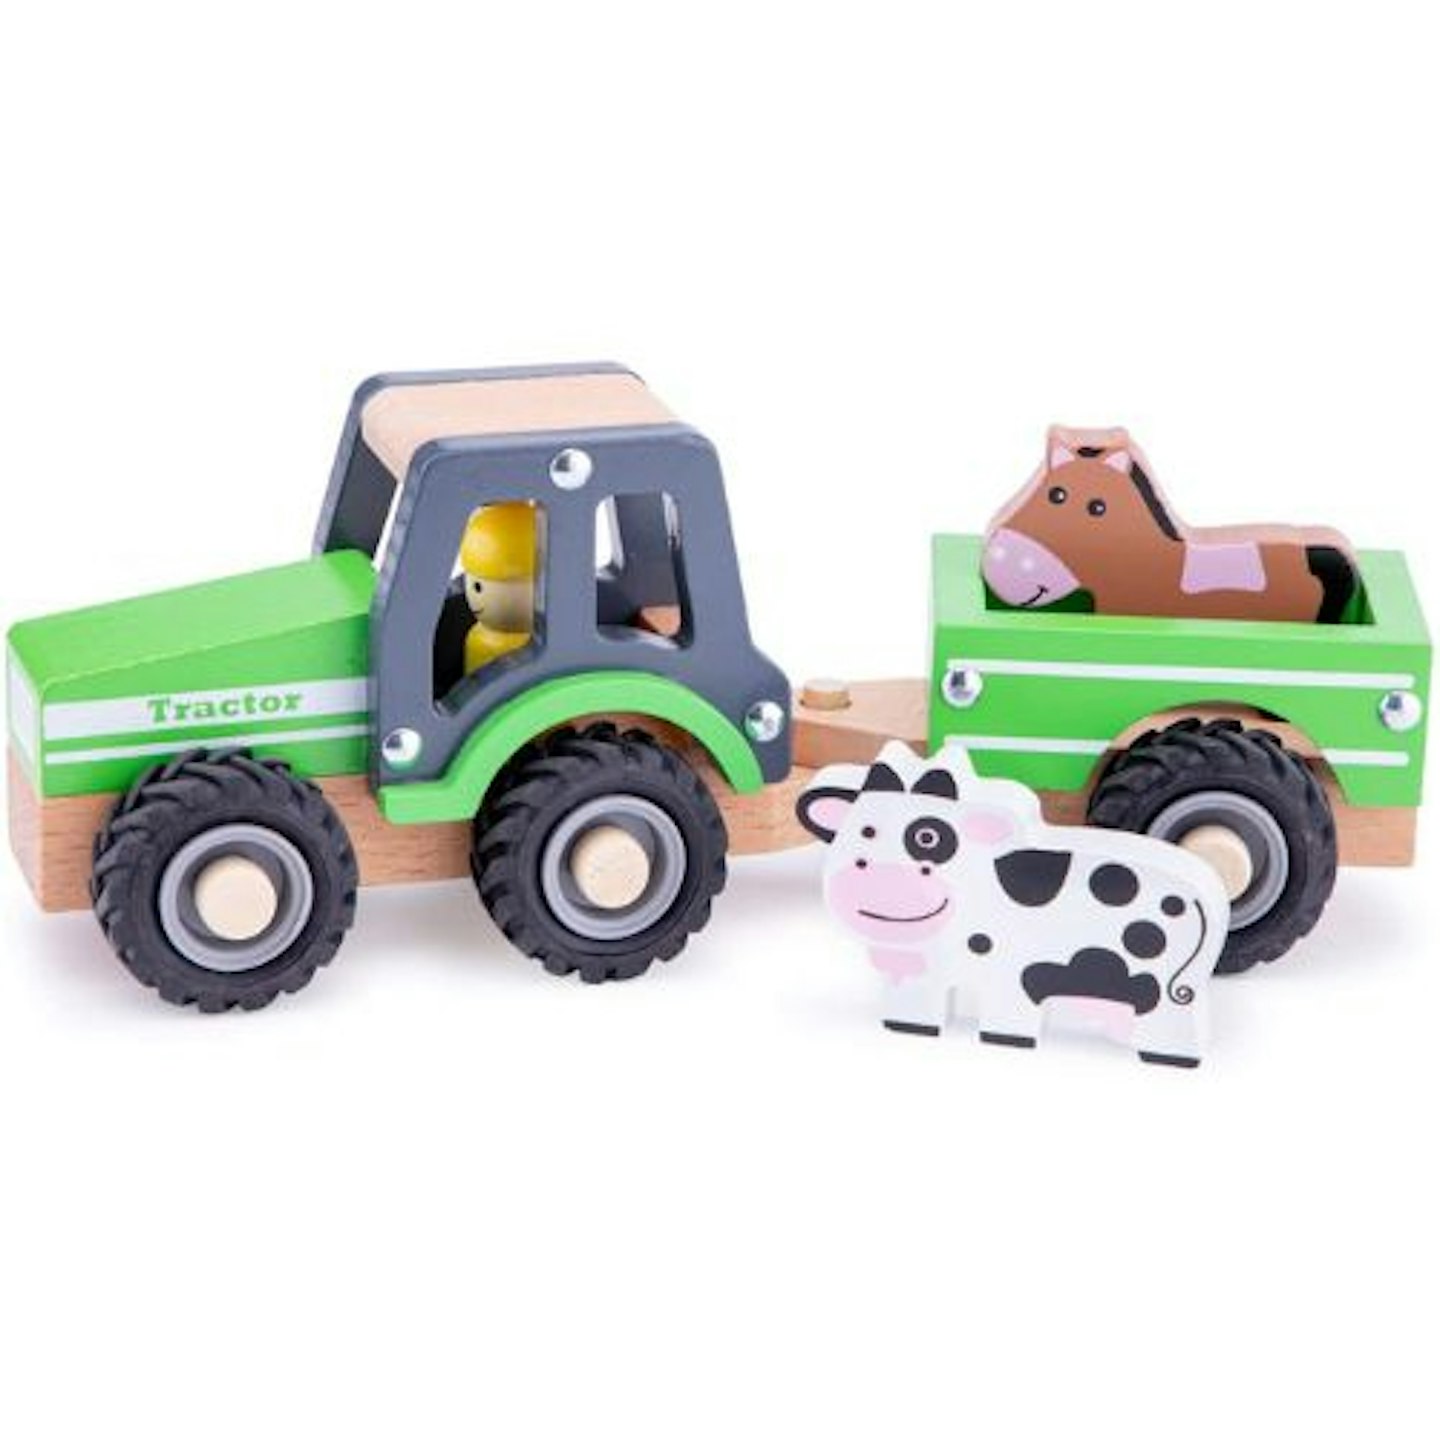 New Classic Toys 11941 Wooden Tractor